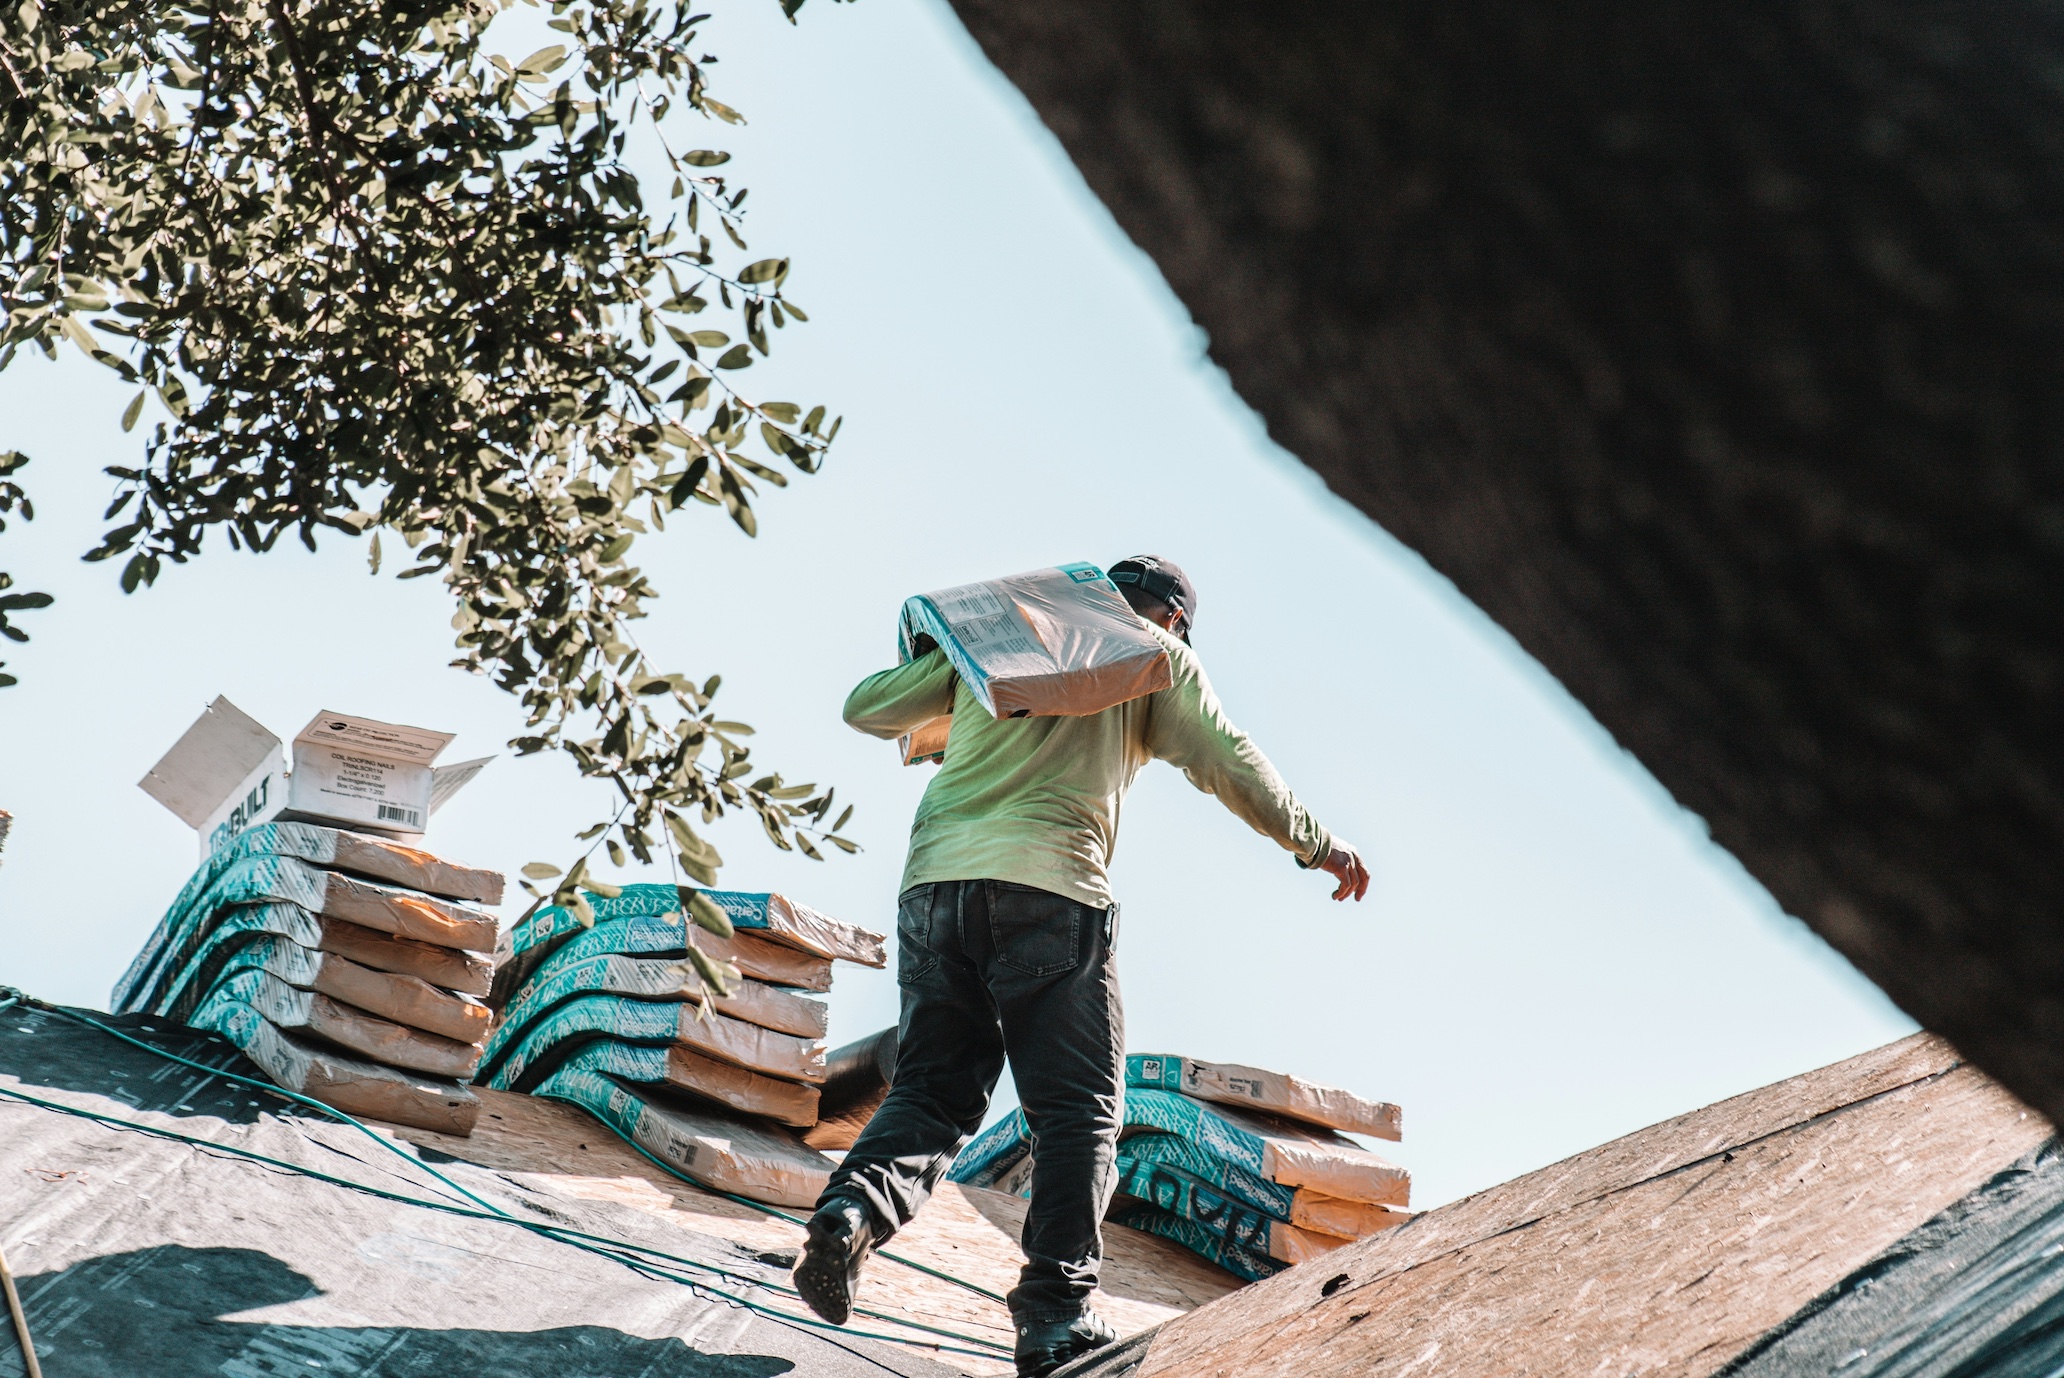 Roofer carrying shingles on roof; image by Zohair Mirza, via Unsplash.com.